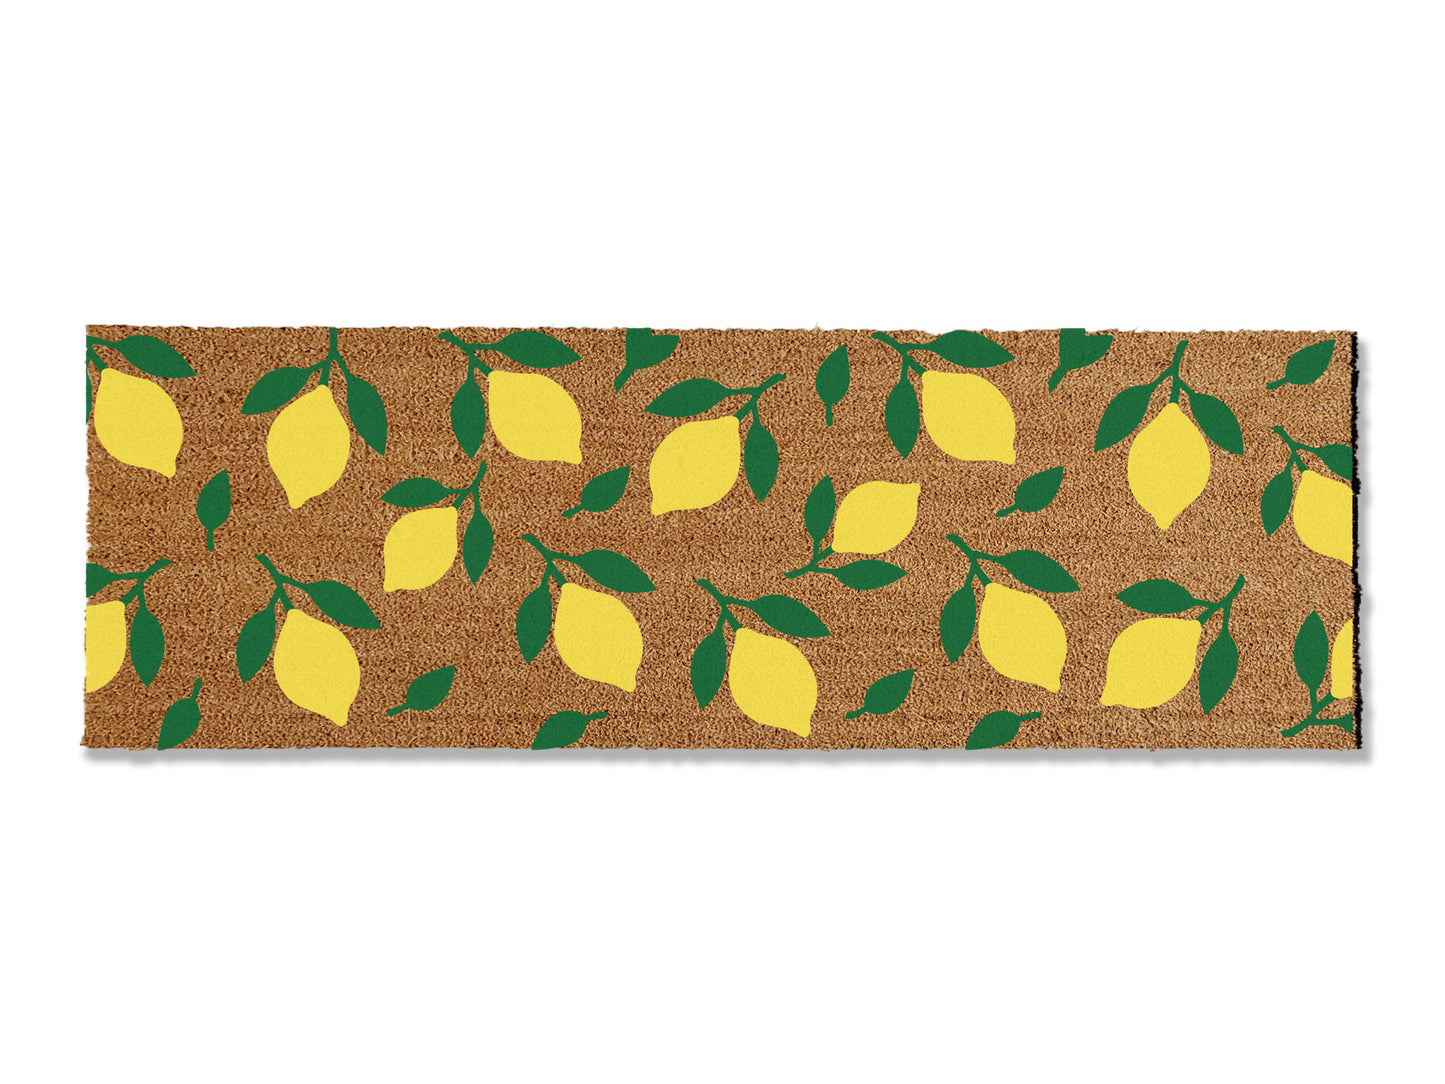 Elevate your entrance with our coir doormat featuring an all-over lemon pattern, perfect for summer or a Tuscan-style home. Available in multiple sizes, this charming mat not only adds a refreshing touch to your doorstep but is also highly effective at trapping dirt.